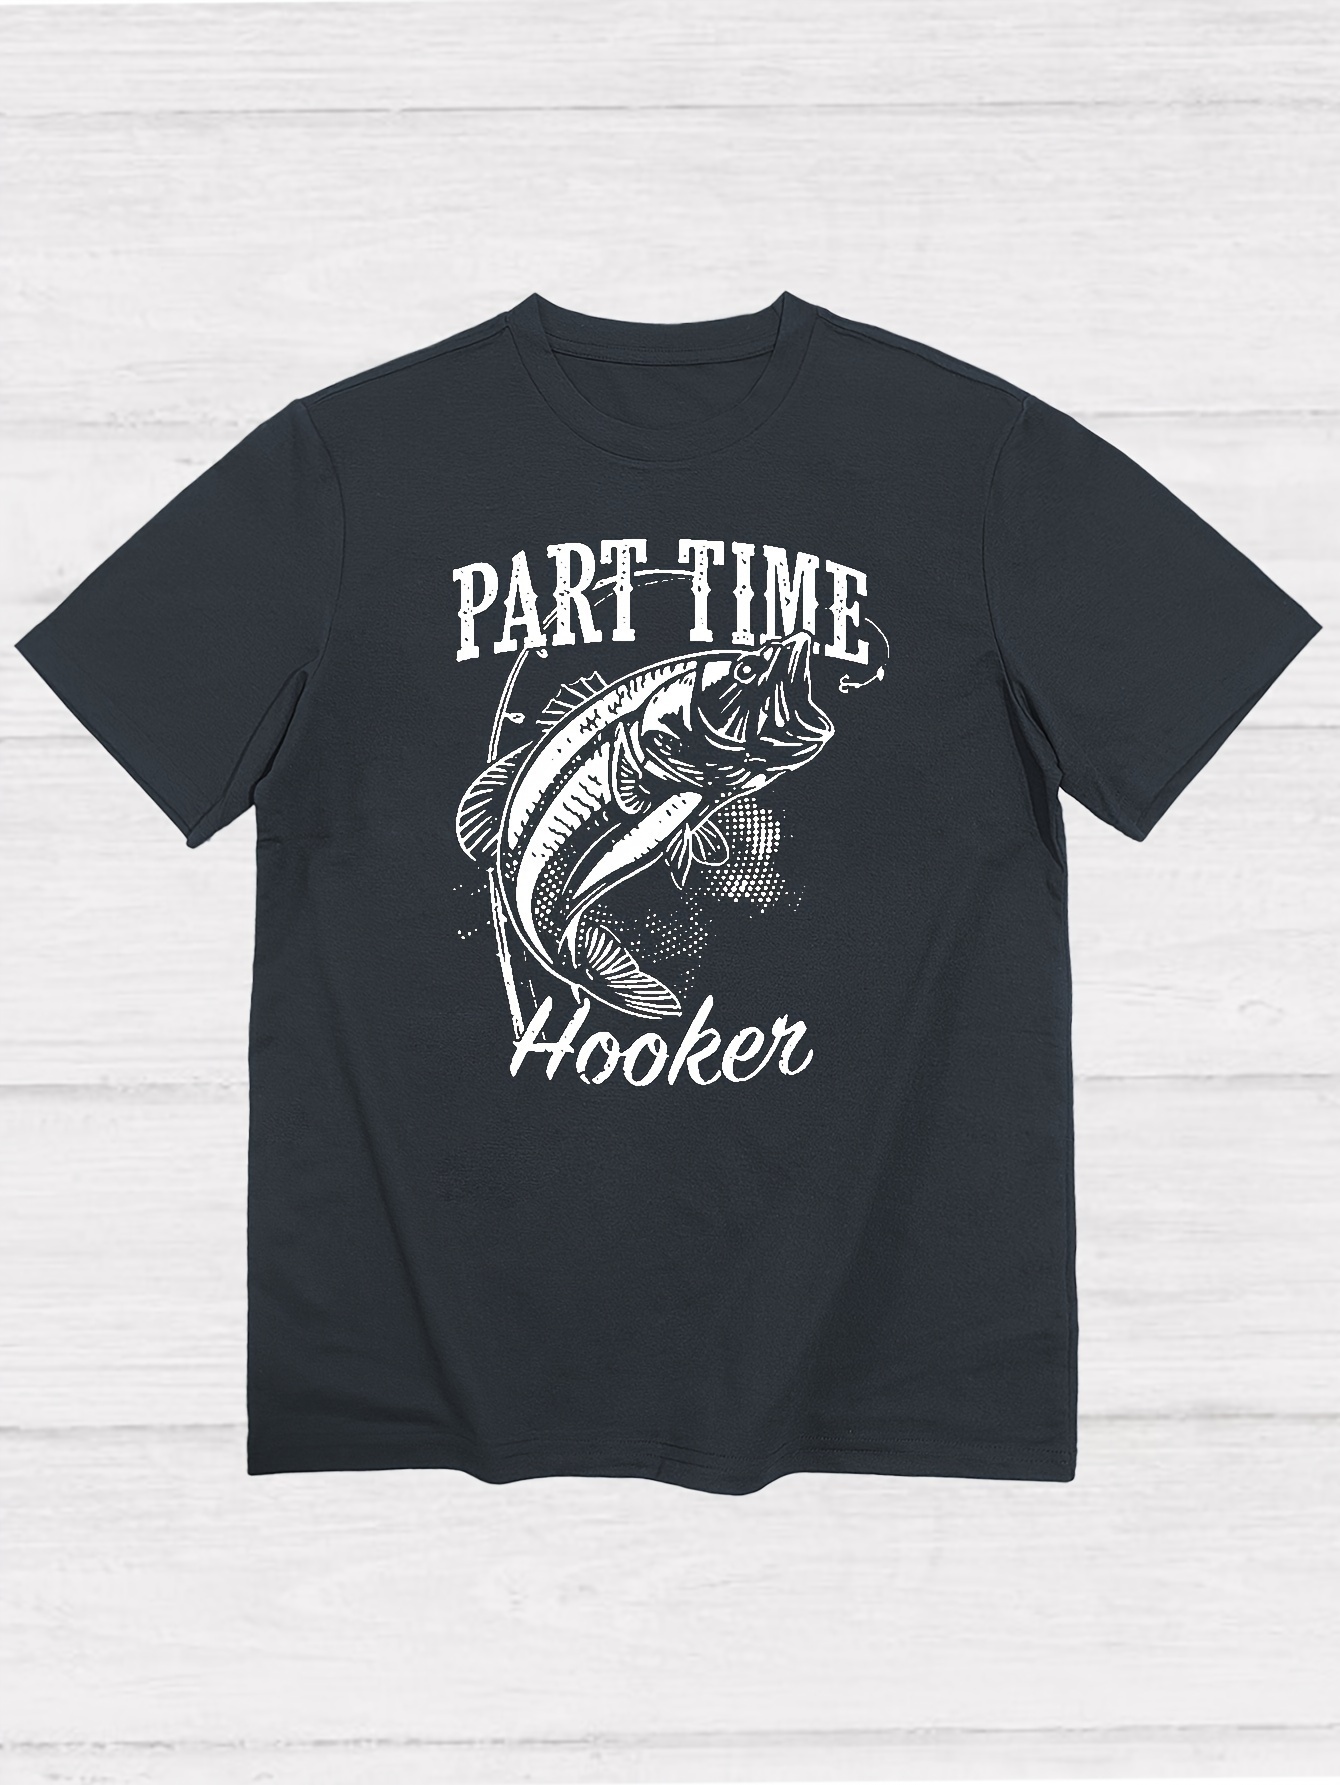 Men's Casual Part Time Hooker Fish Graphic Print Round Neck T-shirt, Summer Oversized Loose Tee Plus Size